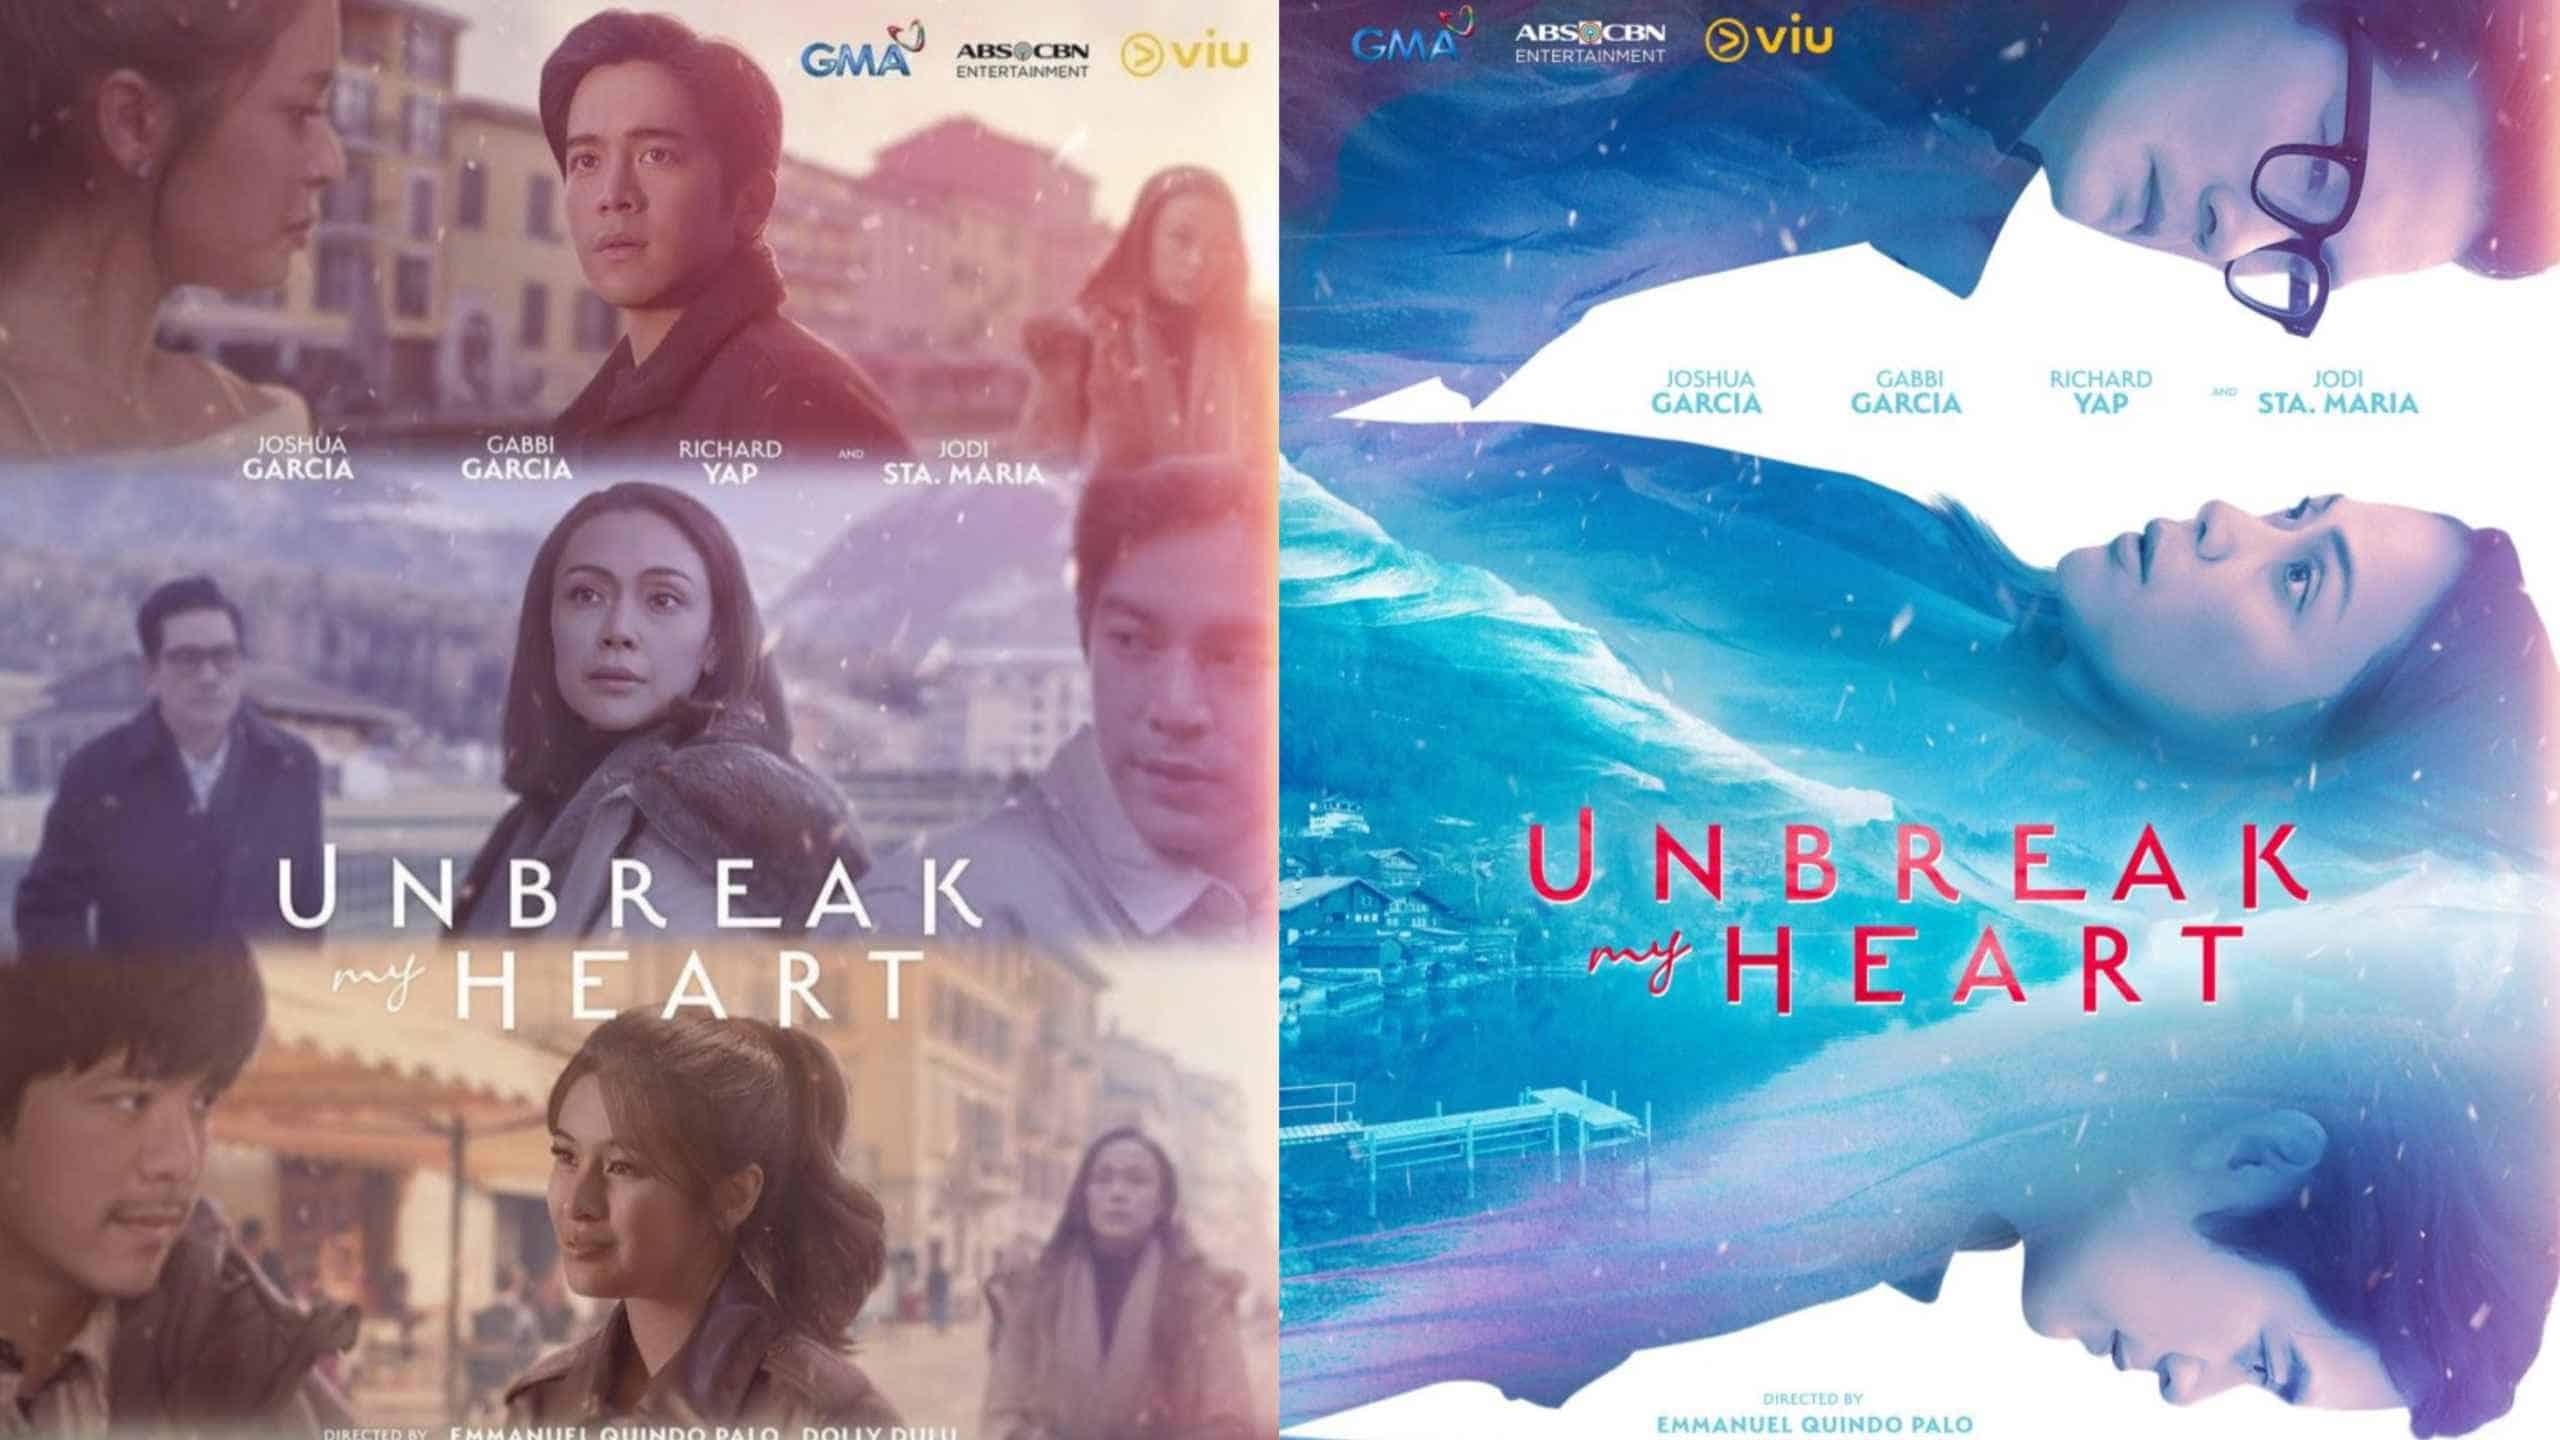 Unbreak My Heart Episode 14: Release Date, Preview & Streaming Guide